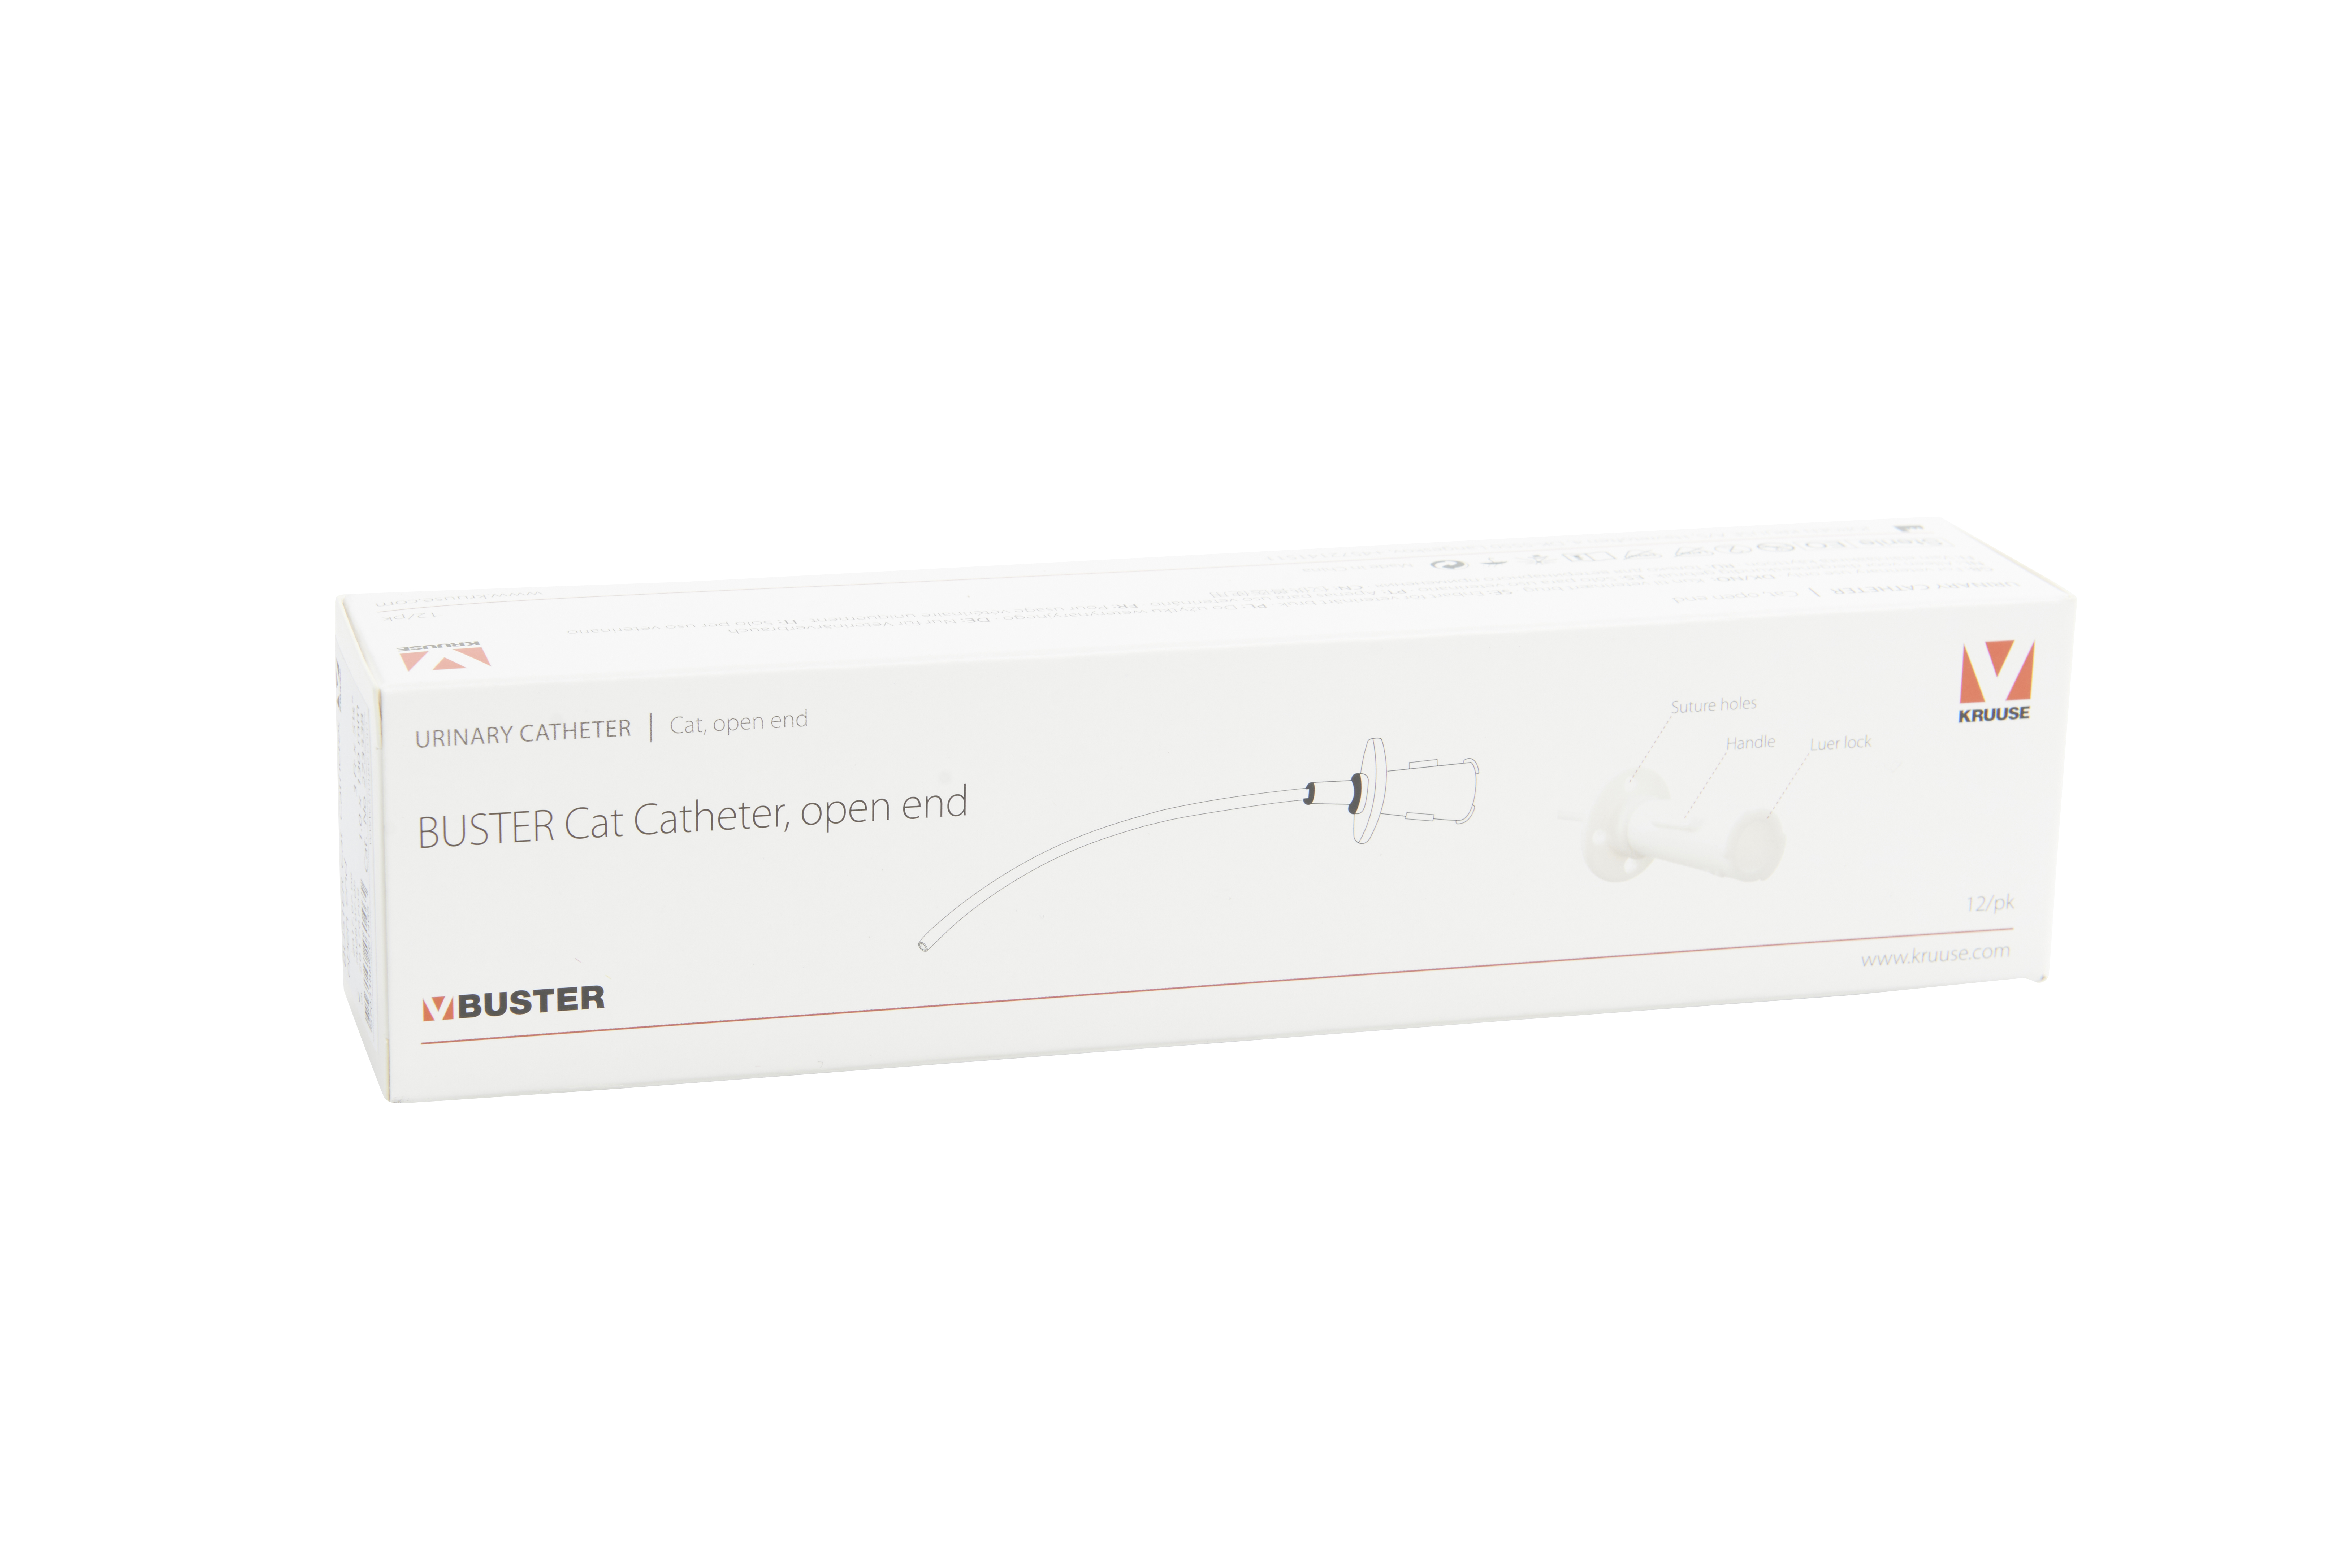 BUSTER sterile cat catheter 1.0 x 130 mm, open end, without stylet, 12/pk